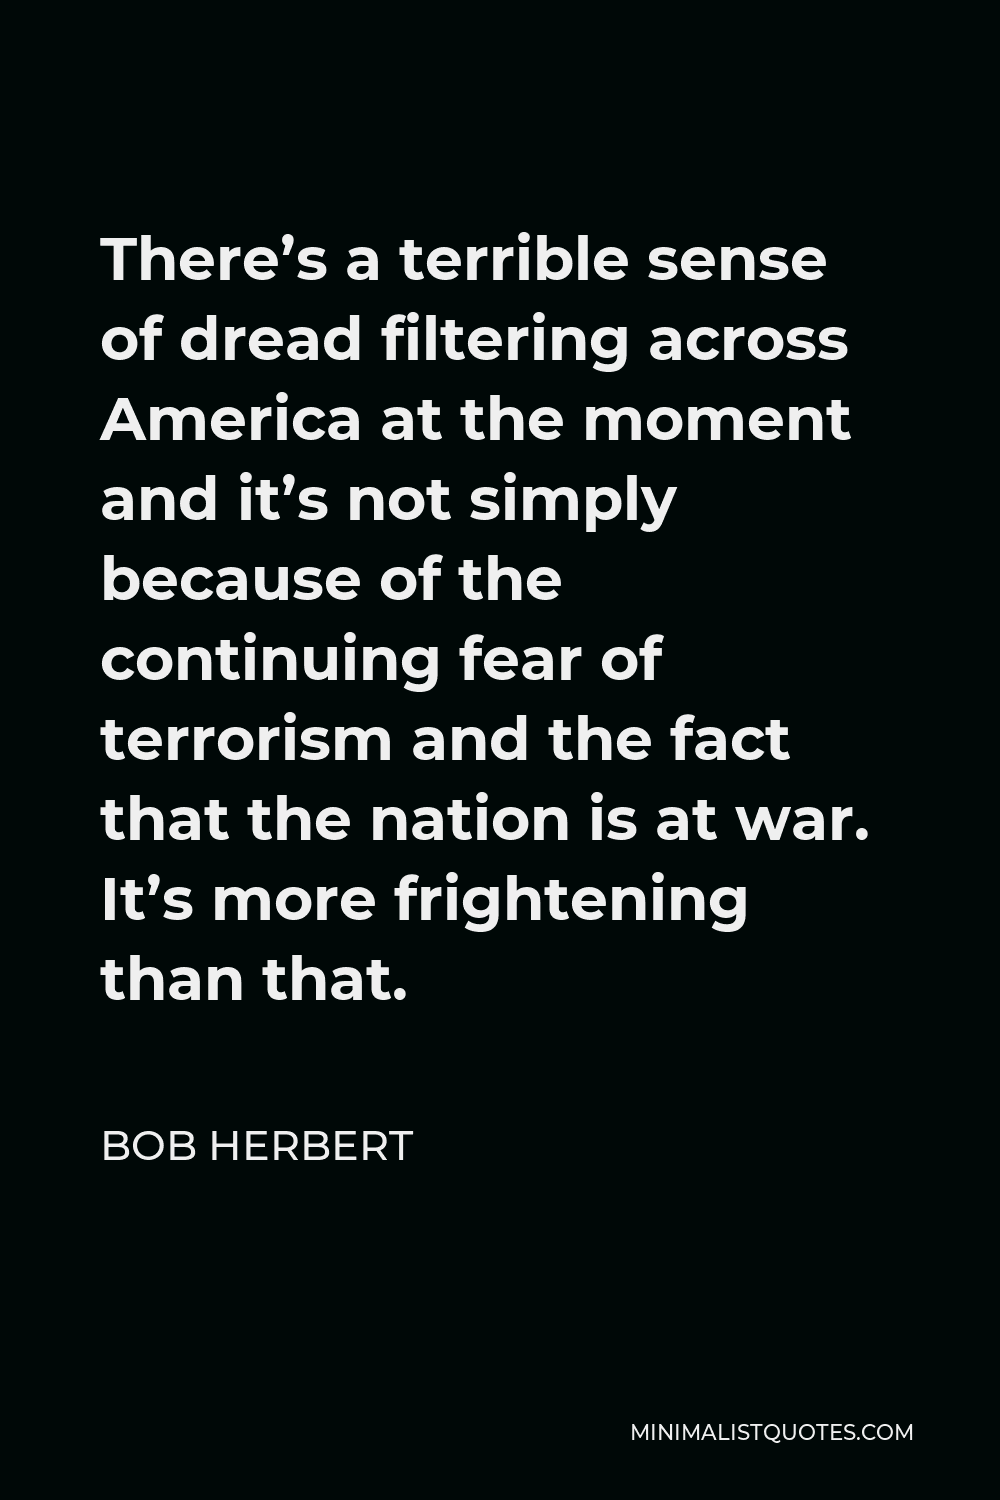 Bob Herbert Quote - There’s a terrible sense of dread filtering across America at the moment and it’s not simply because of the continuing fear of terrorism and the fact that the nation is at war. It’s more frightening than that.